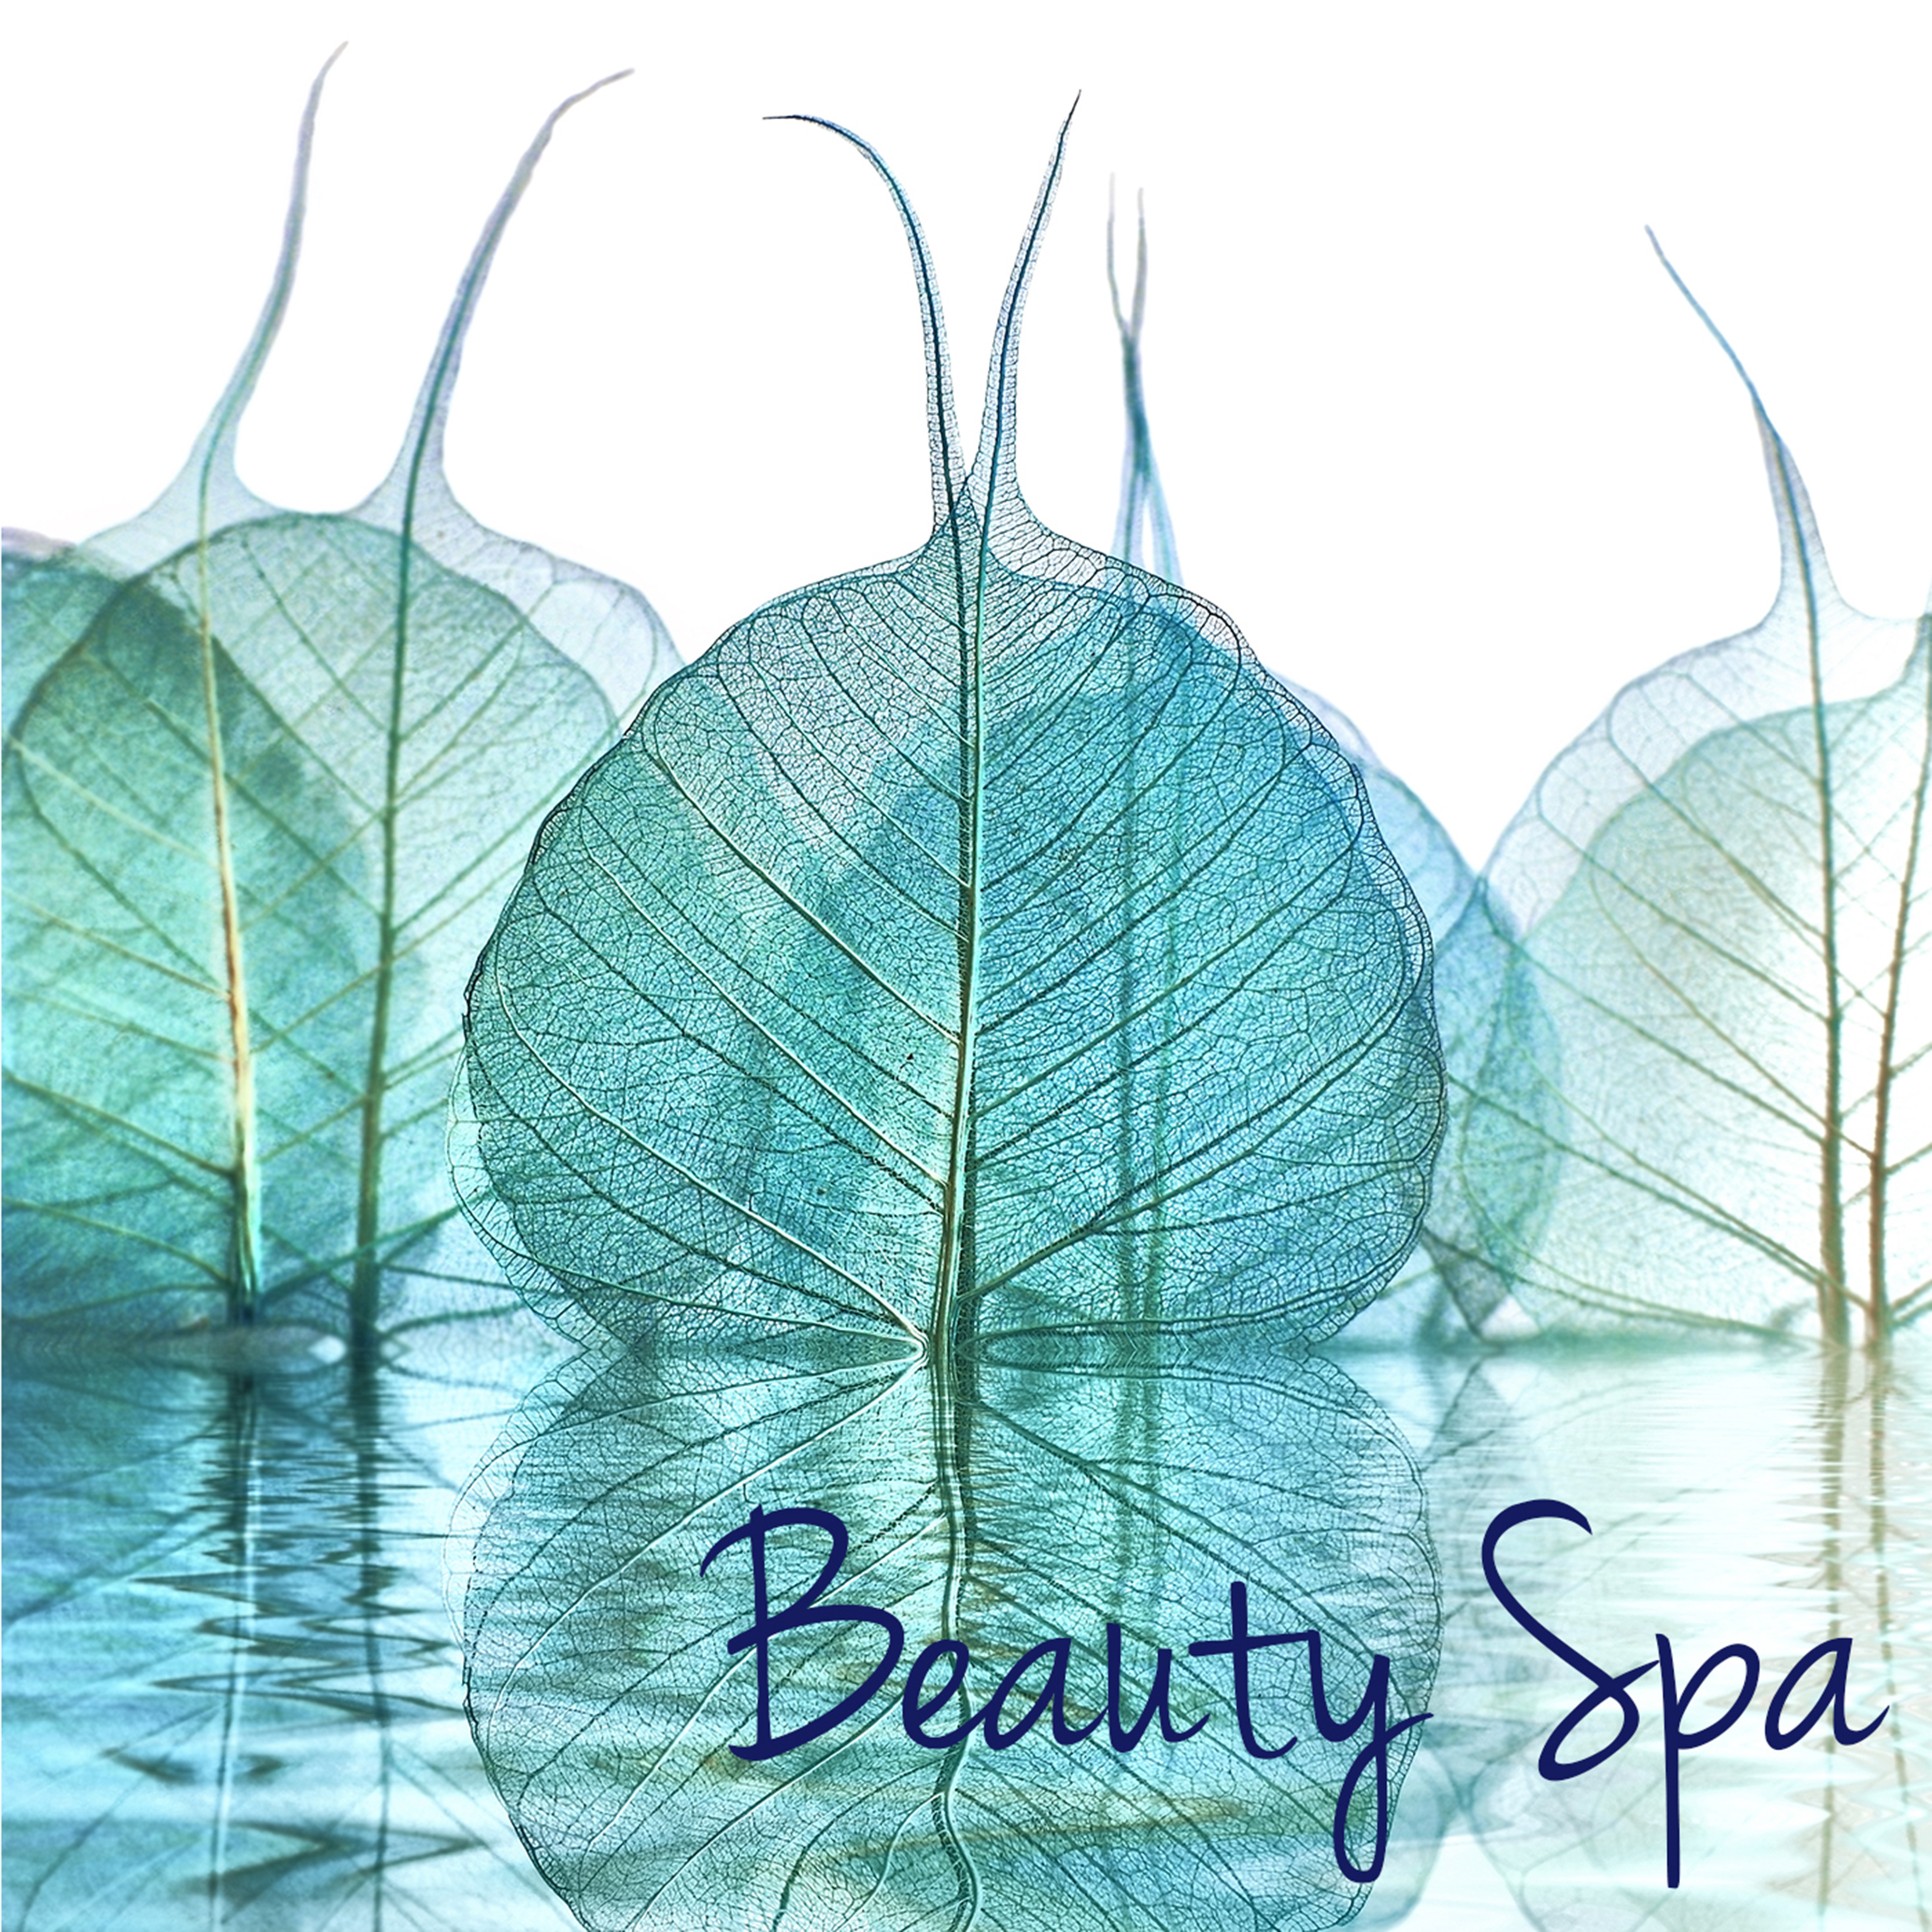 Beauty Spa  New Age Asian  Chill Nature Songs for Spa, Massage, Relax, Sauna  Zen Meditation